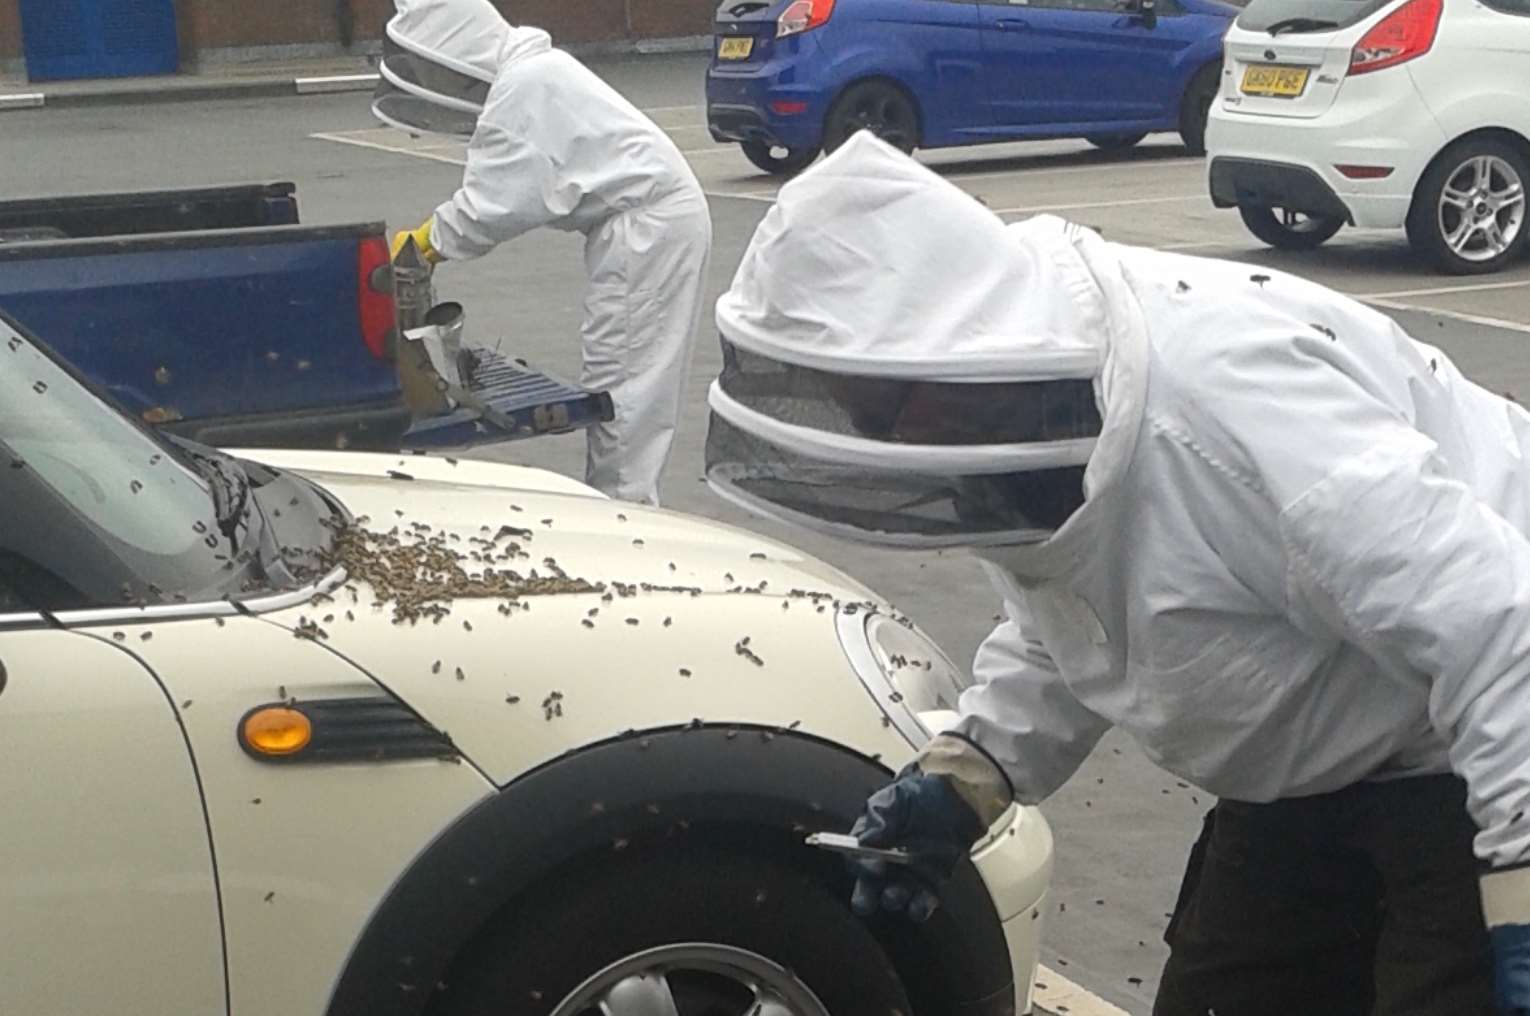 Beekeepers tending to the car